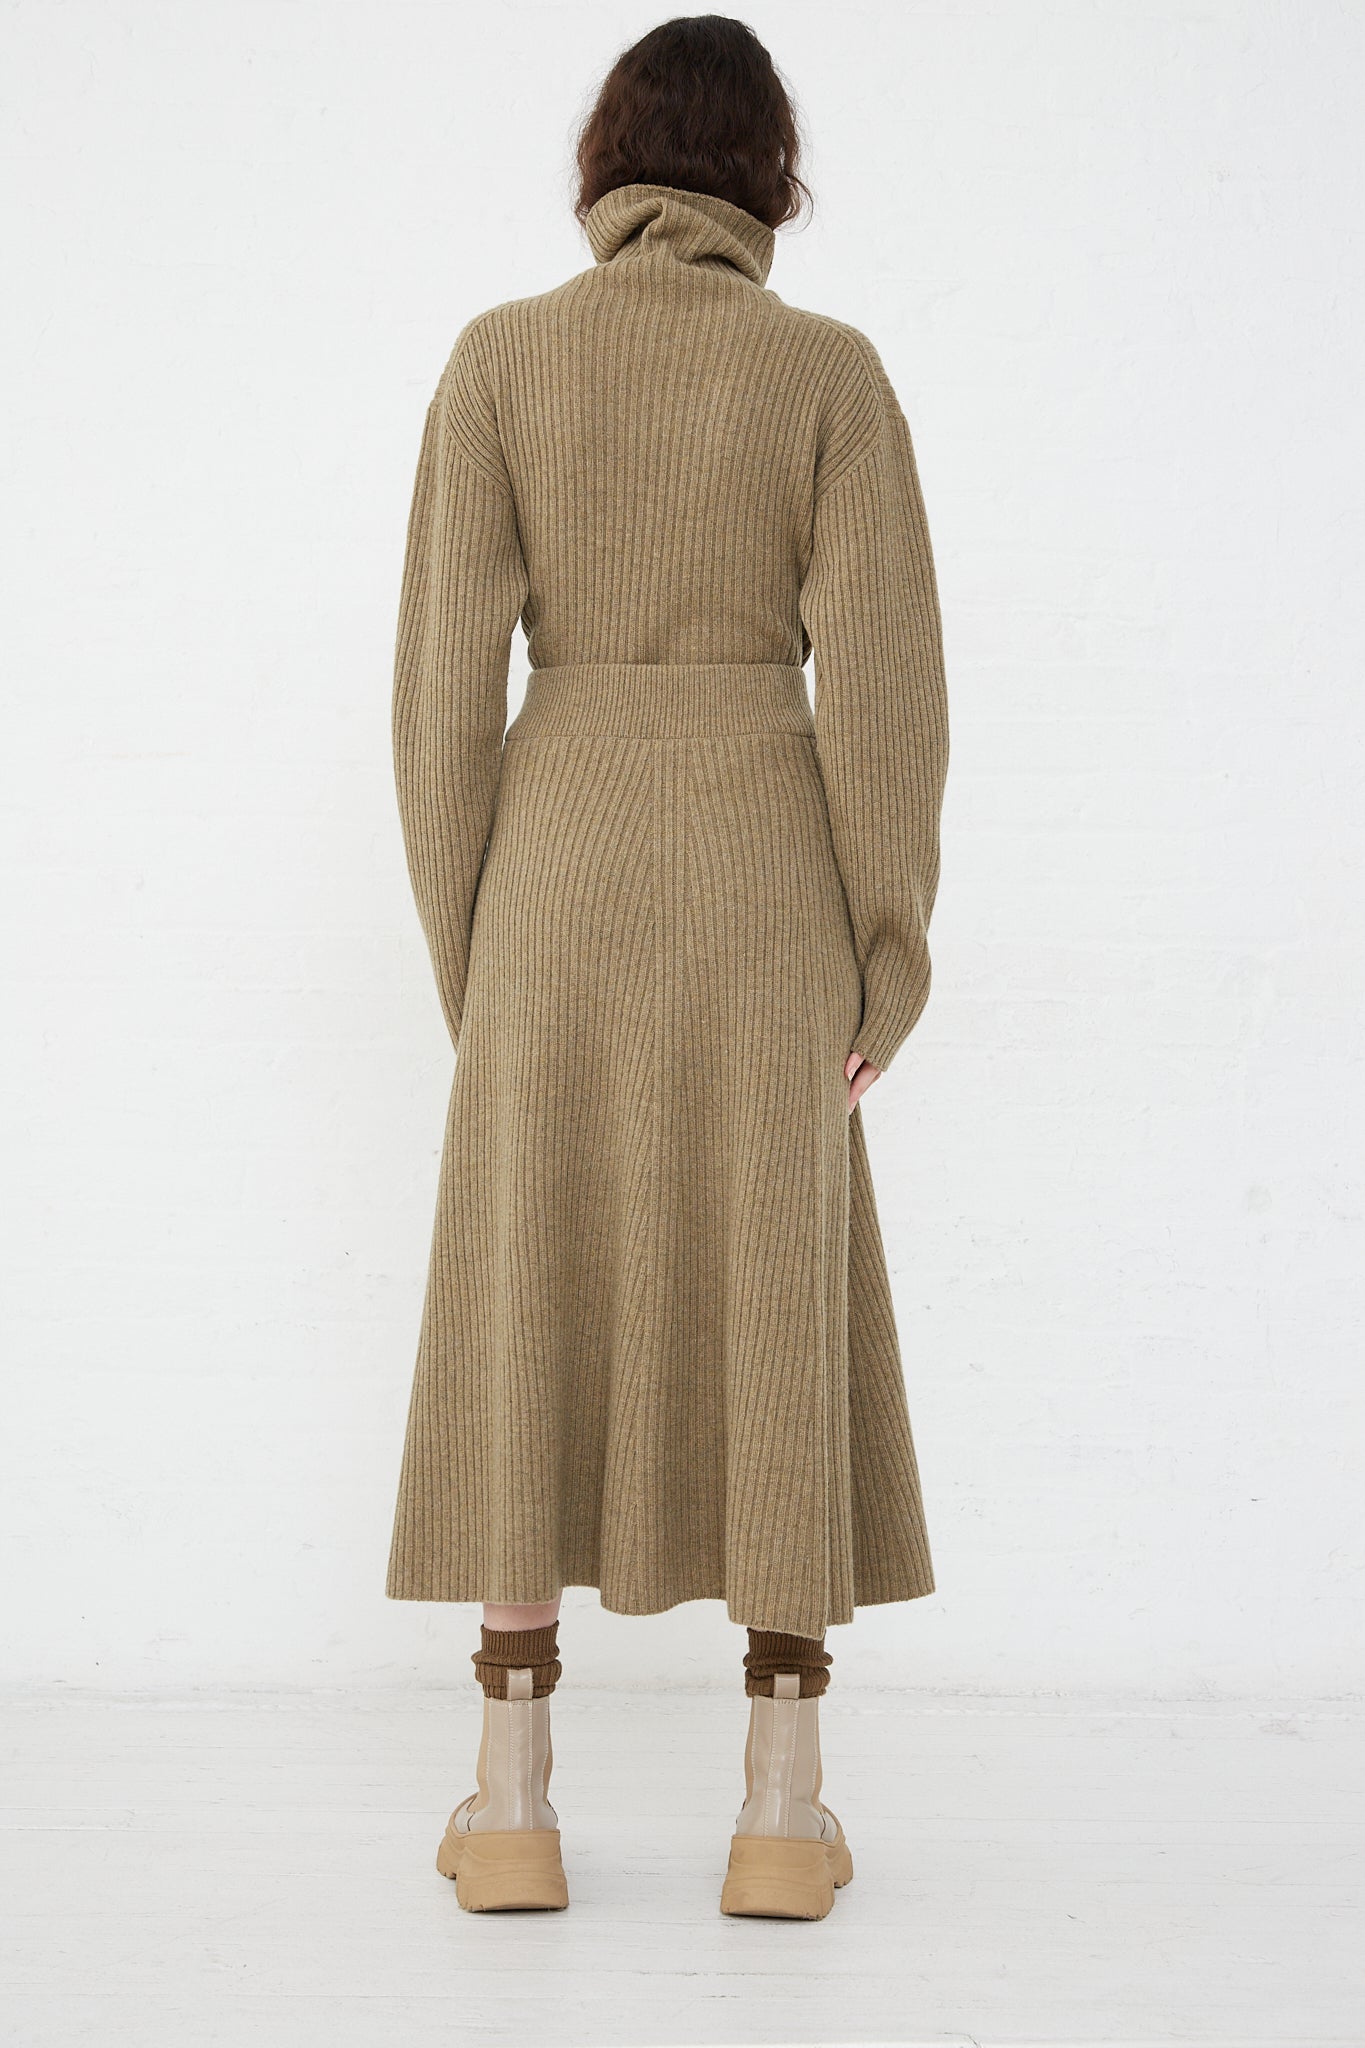 The back view of a woman wearing an Ichi Antiquités Wool Rib Knit Skirt in Mocha.